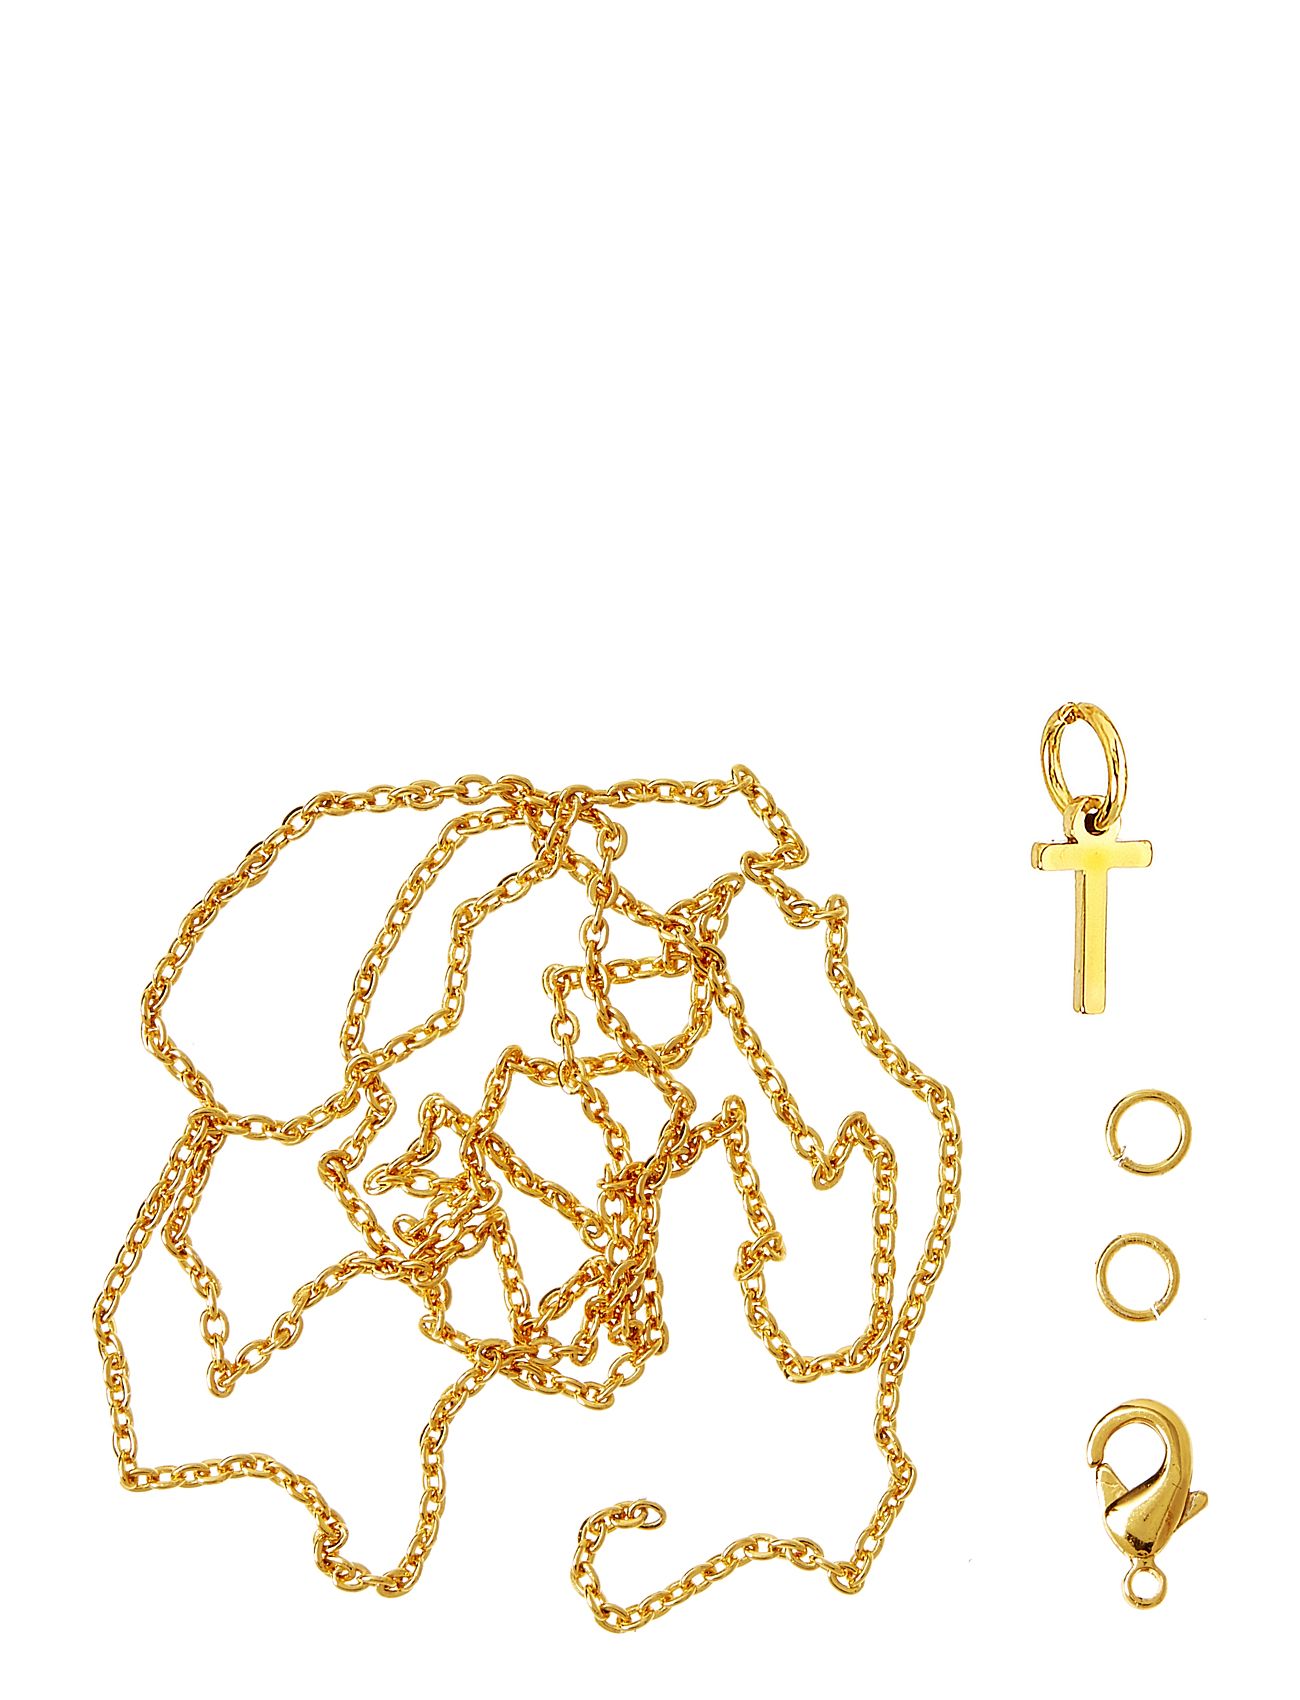 Letter T Gp With O-Ring, Chain And Clasp Toys Creativity Drawing & Crafts Craft Jewellery & Accessories Gold Me & My Box